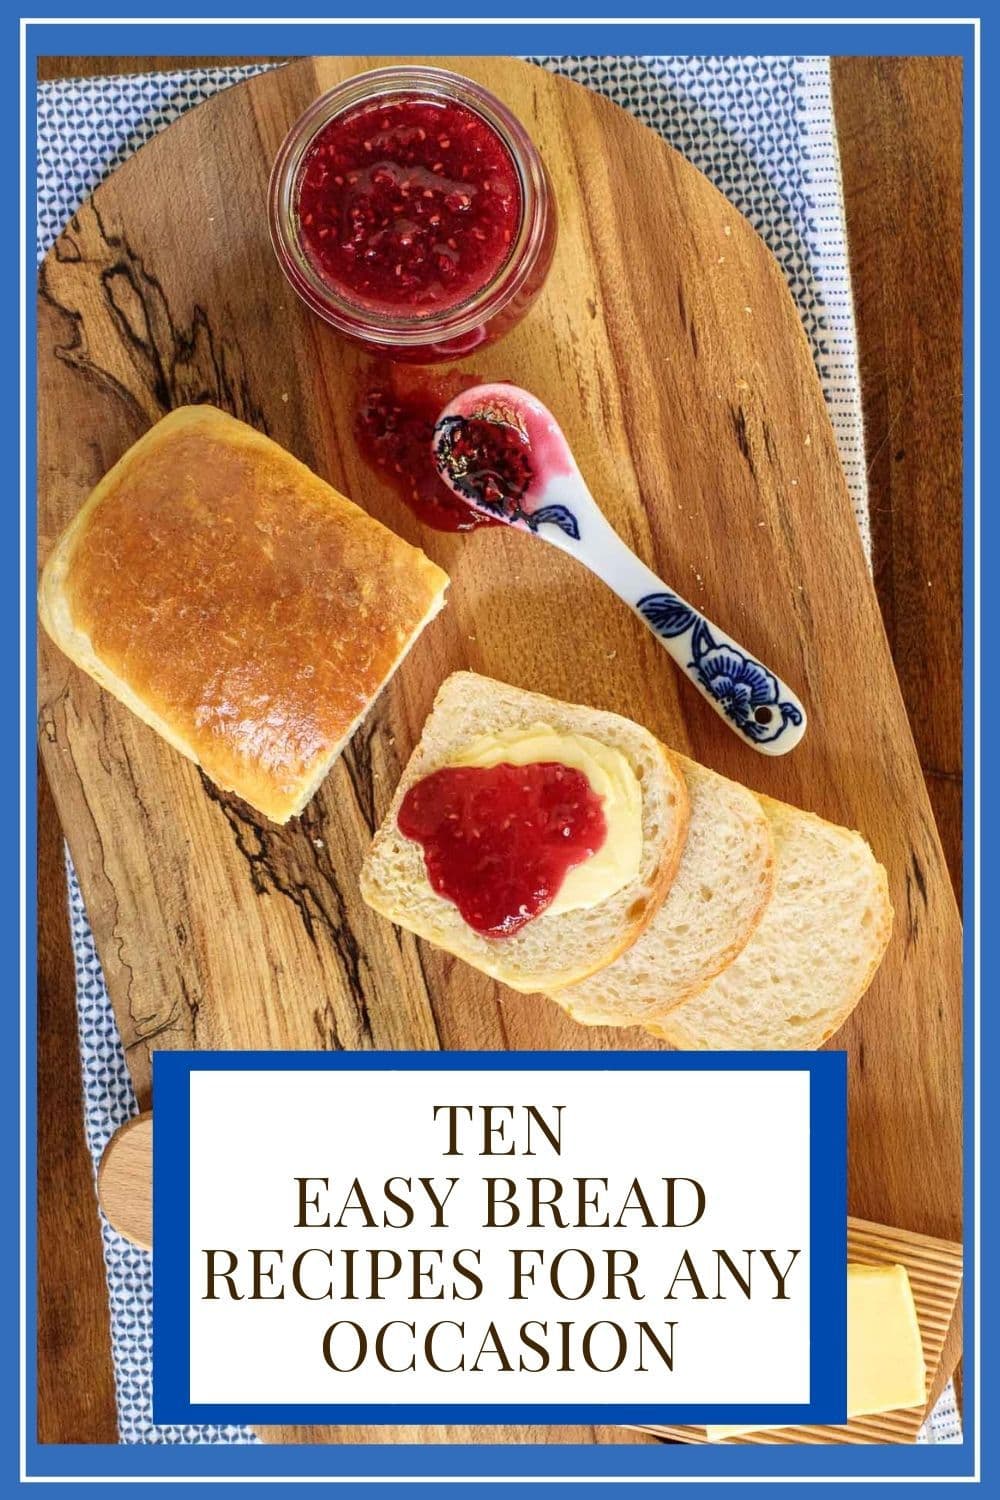 No Need to Knead! Easy Bread Recipes for Every Occasion